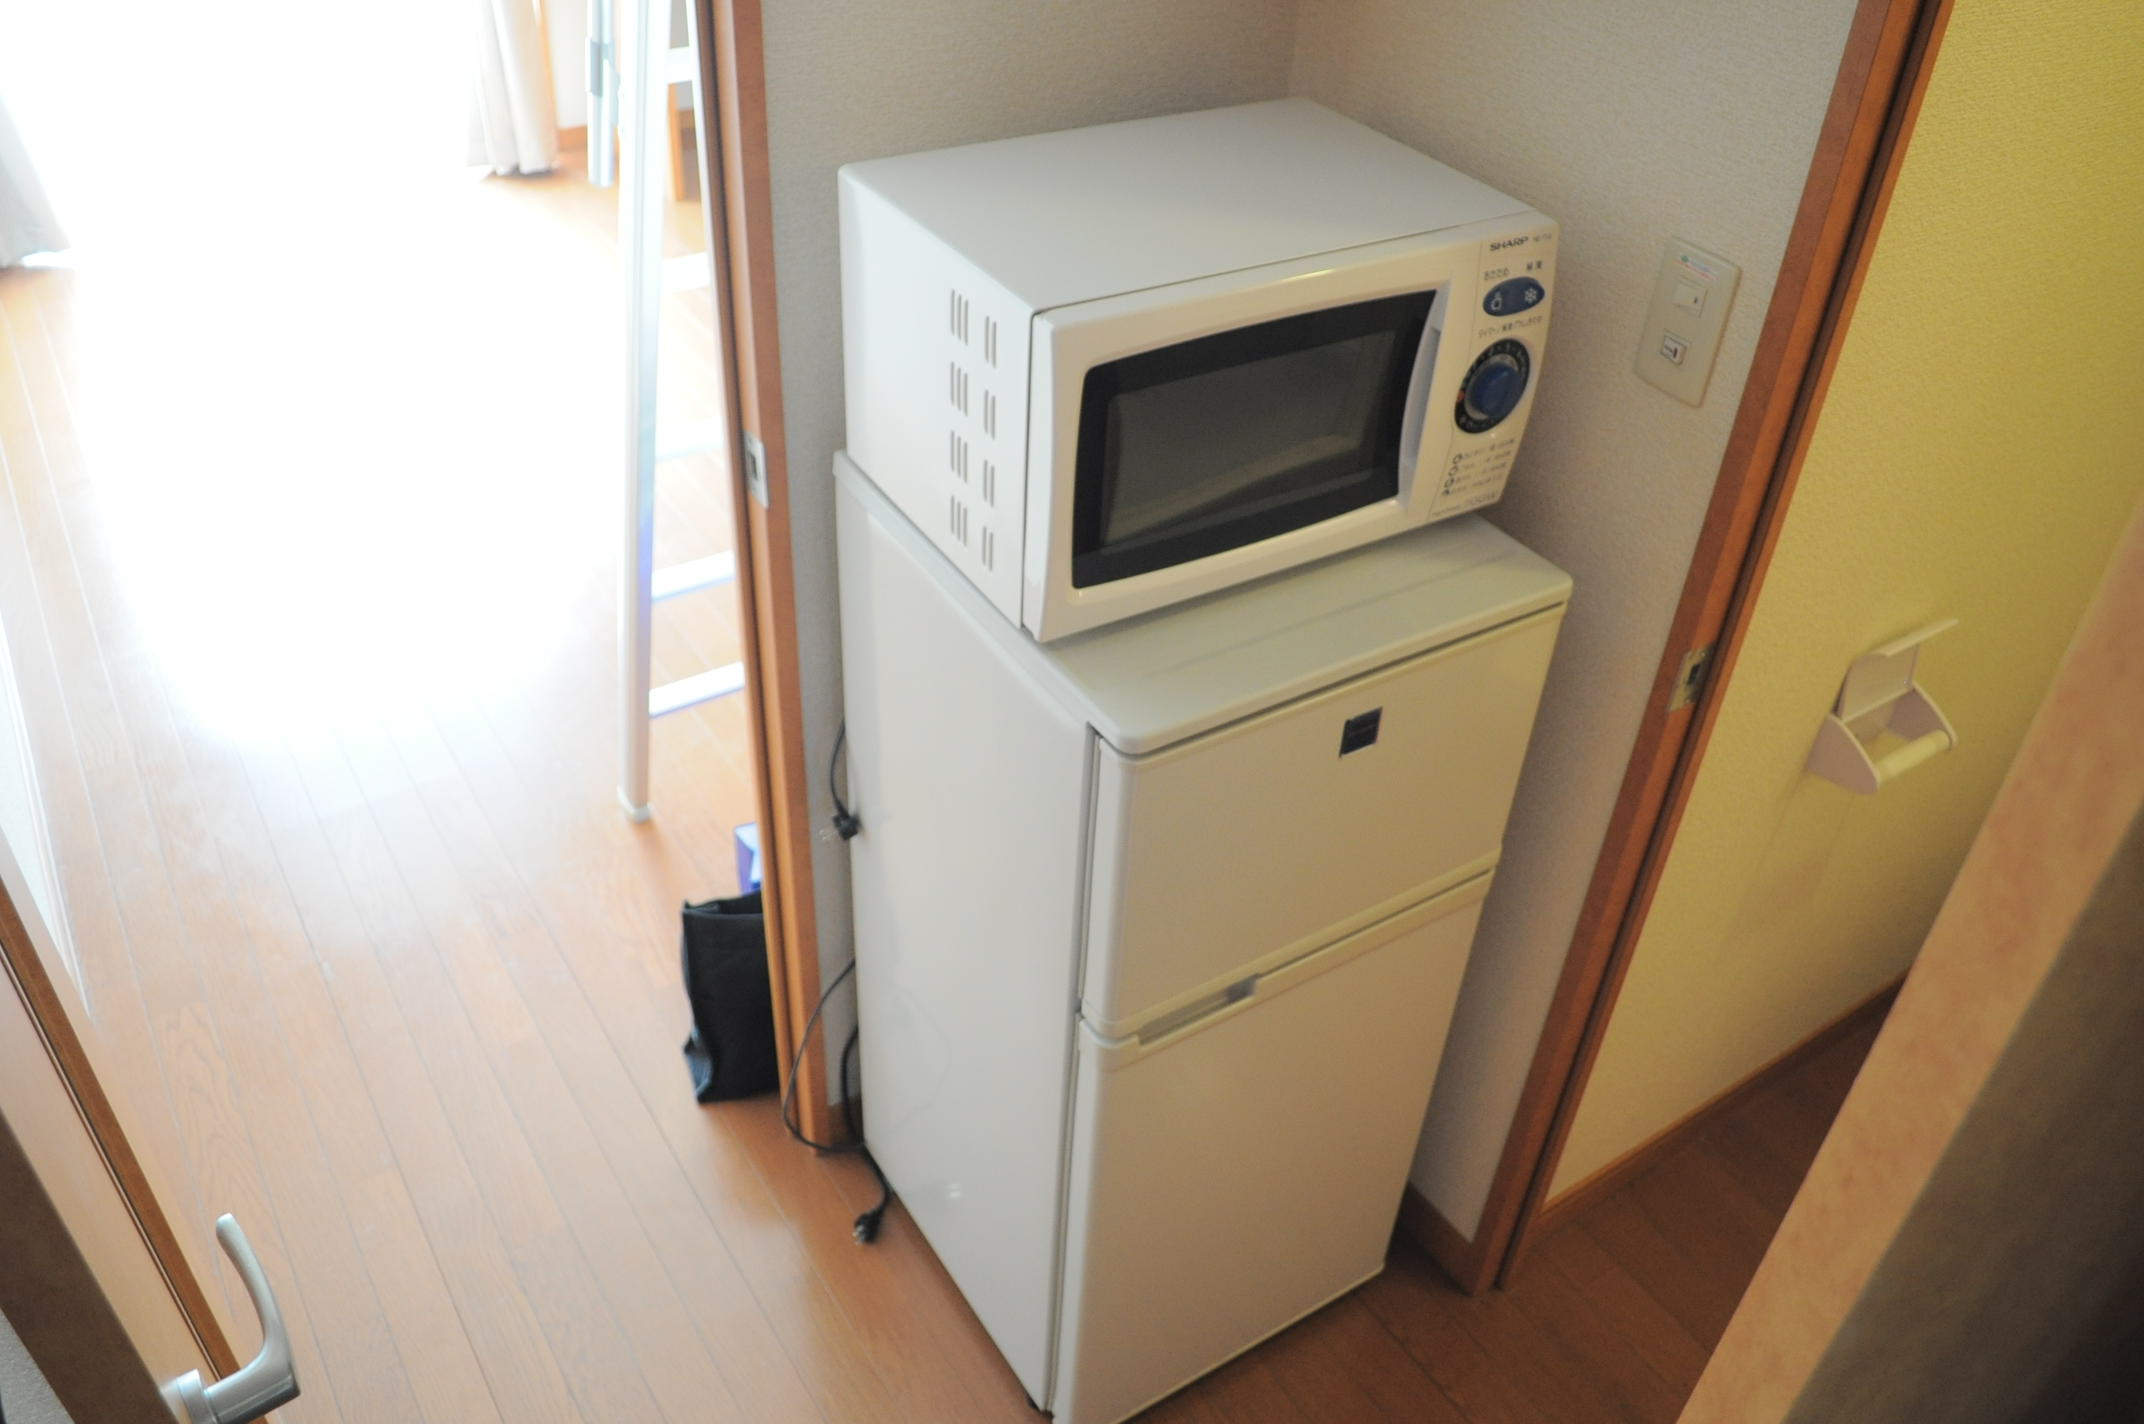 Other Equipment. range Fridge Also equipped with washing machine inside the room